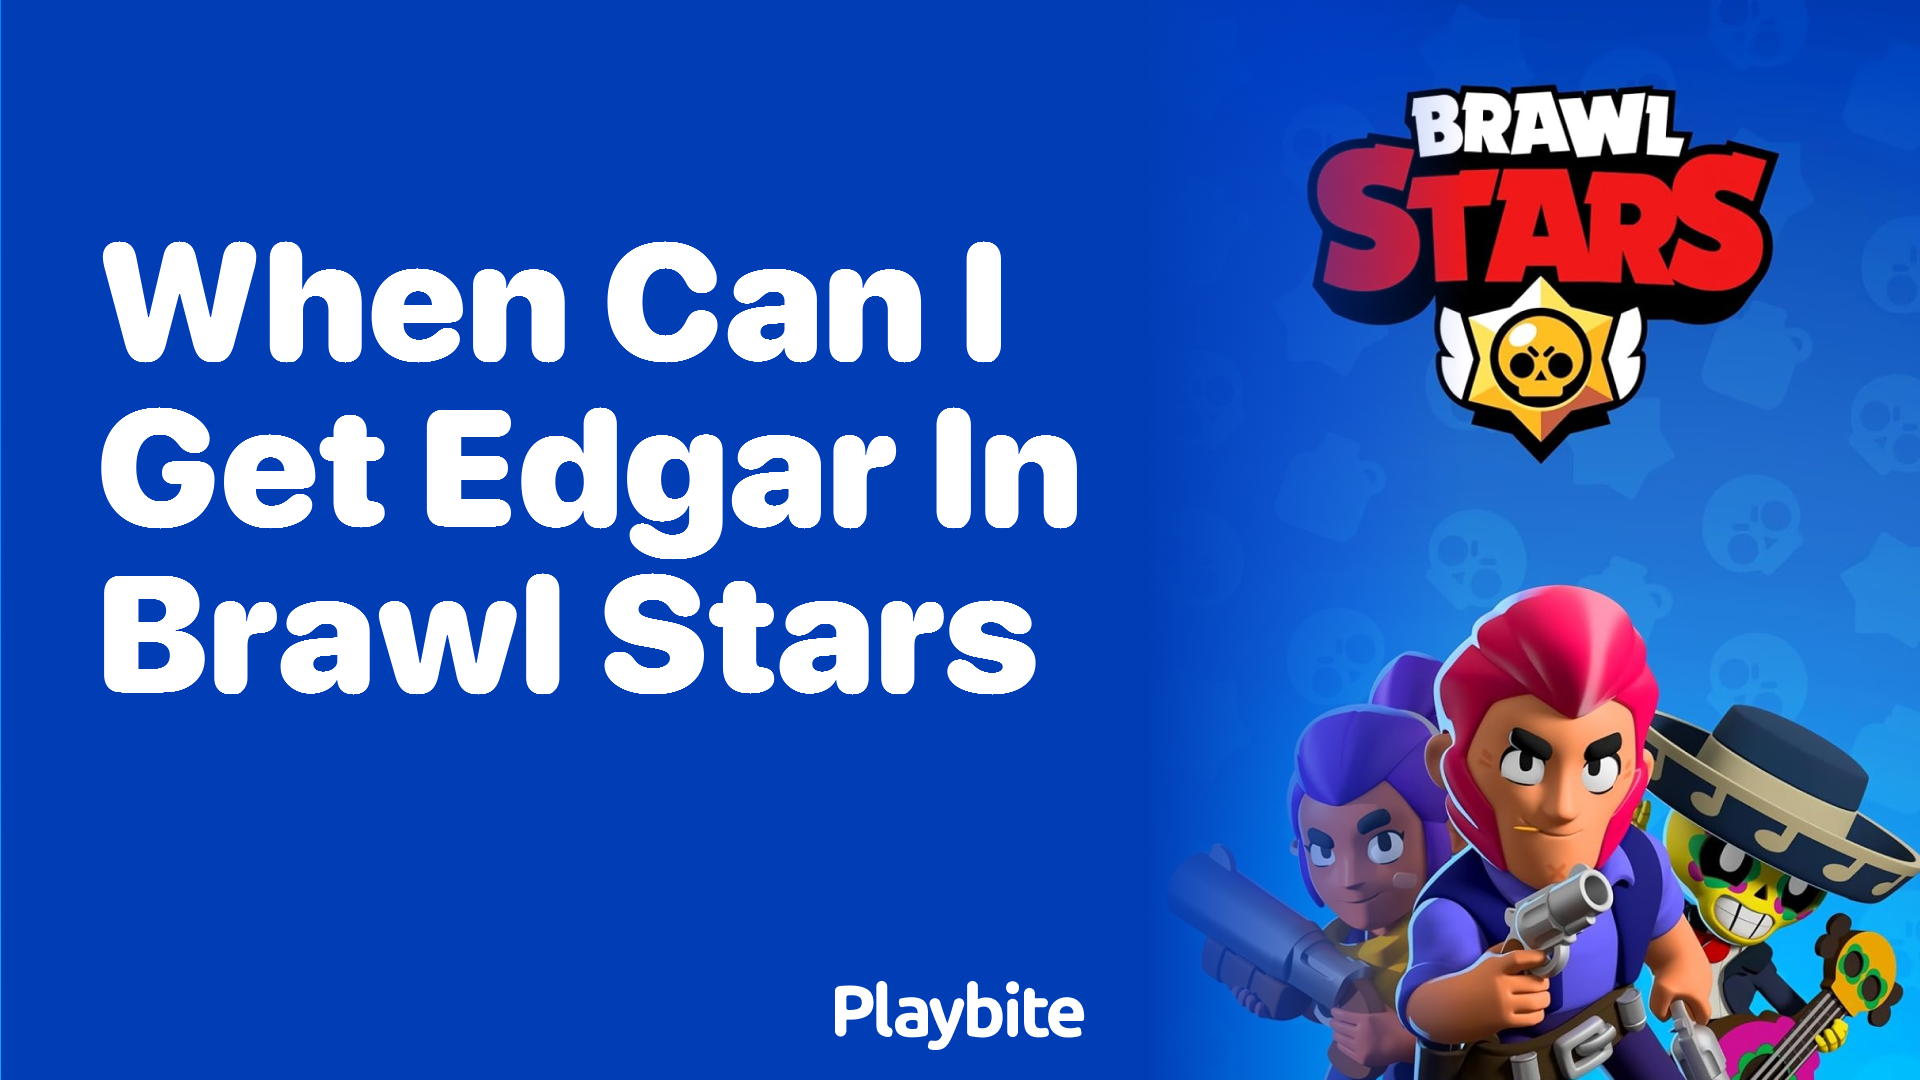 When Can You Get Edgar in Brawl Stars? - Playbite